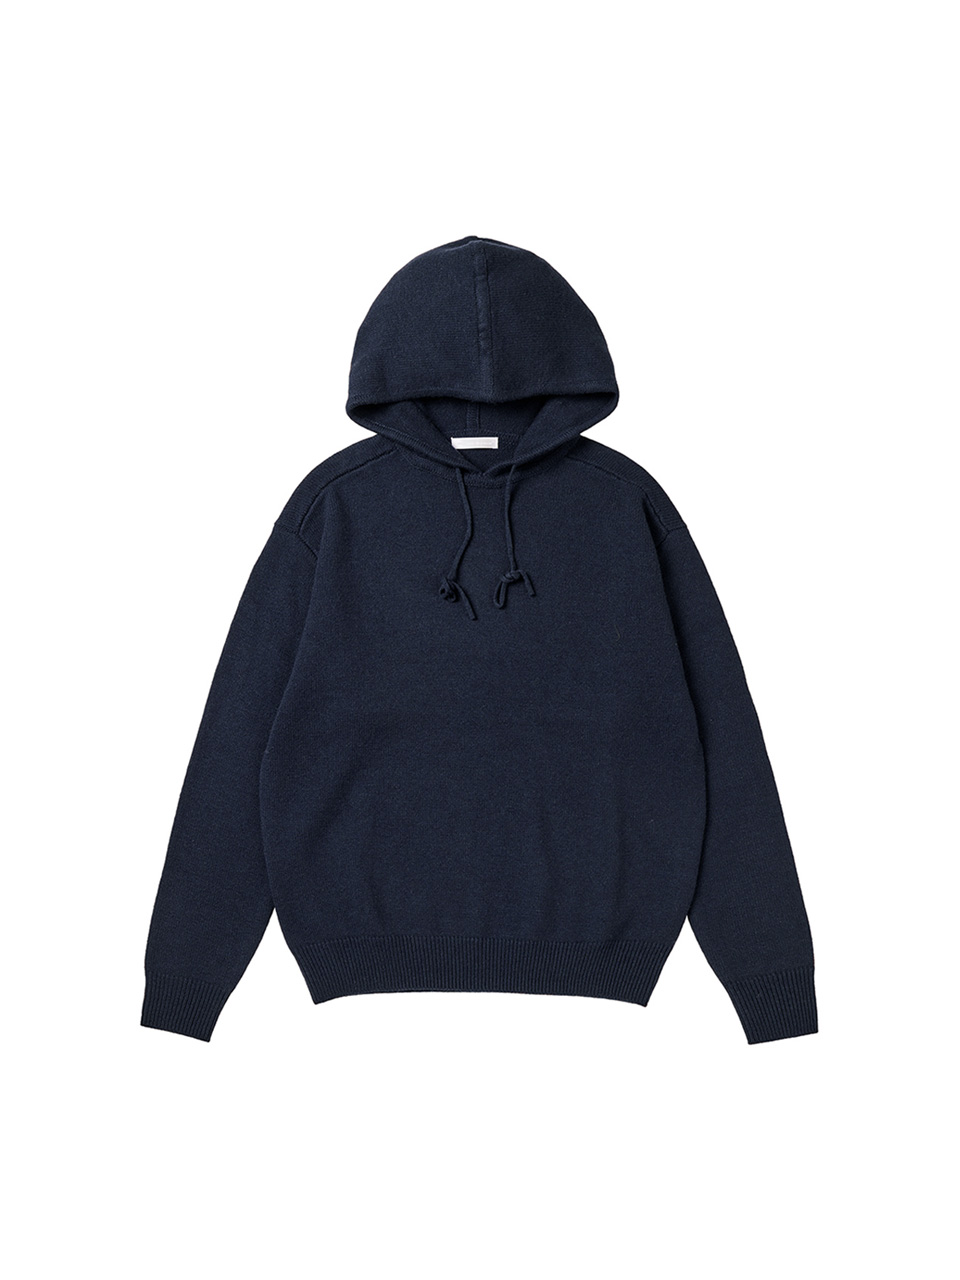 WORTHWHILE MOVEMENT - COMFY KNIT HOODIE (NAVY)